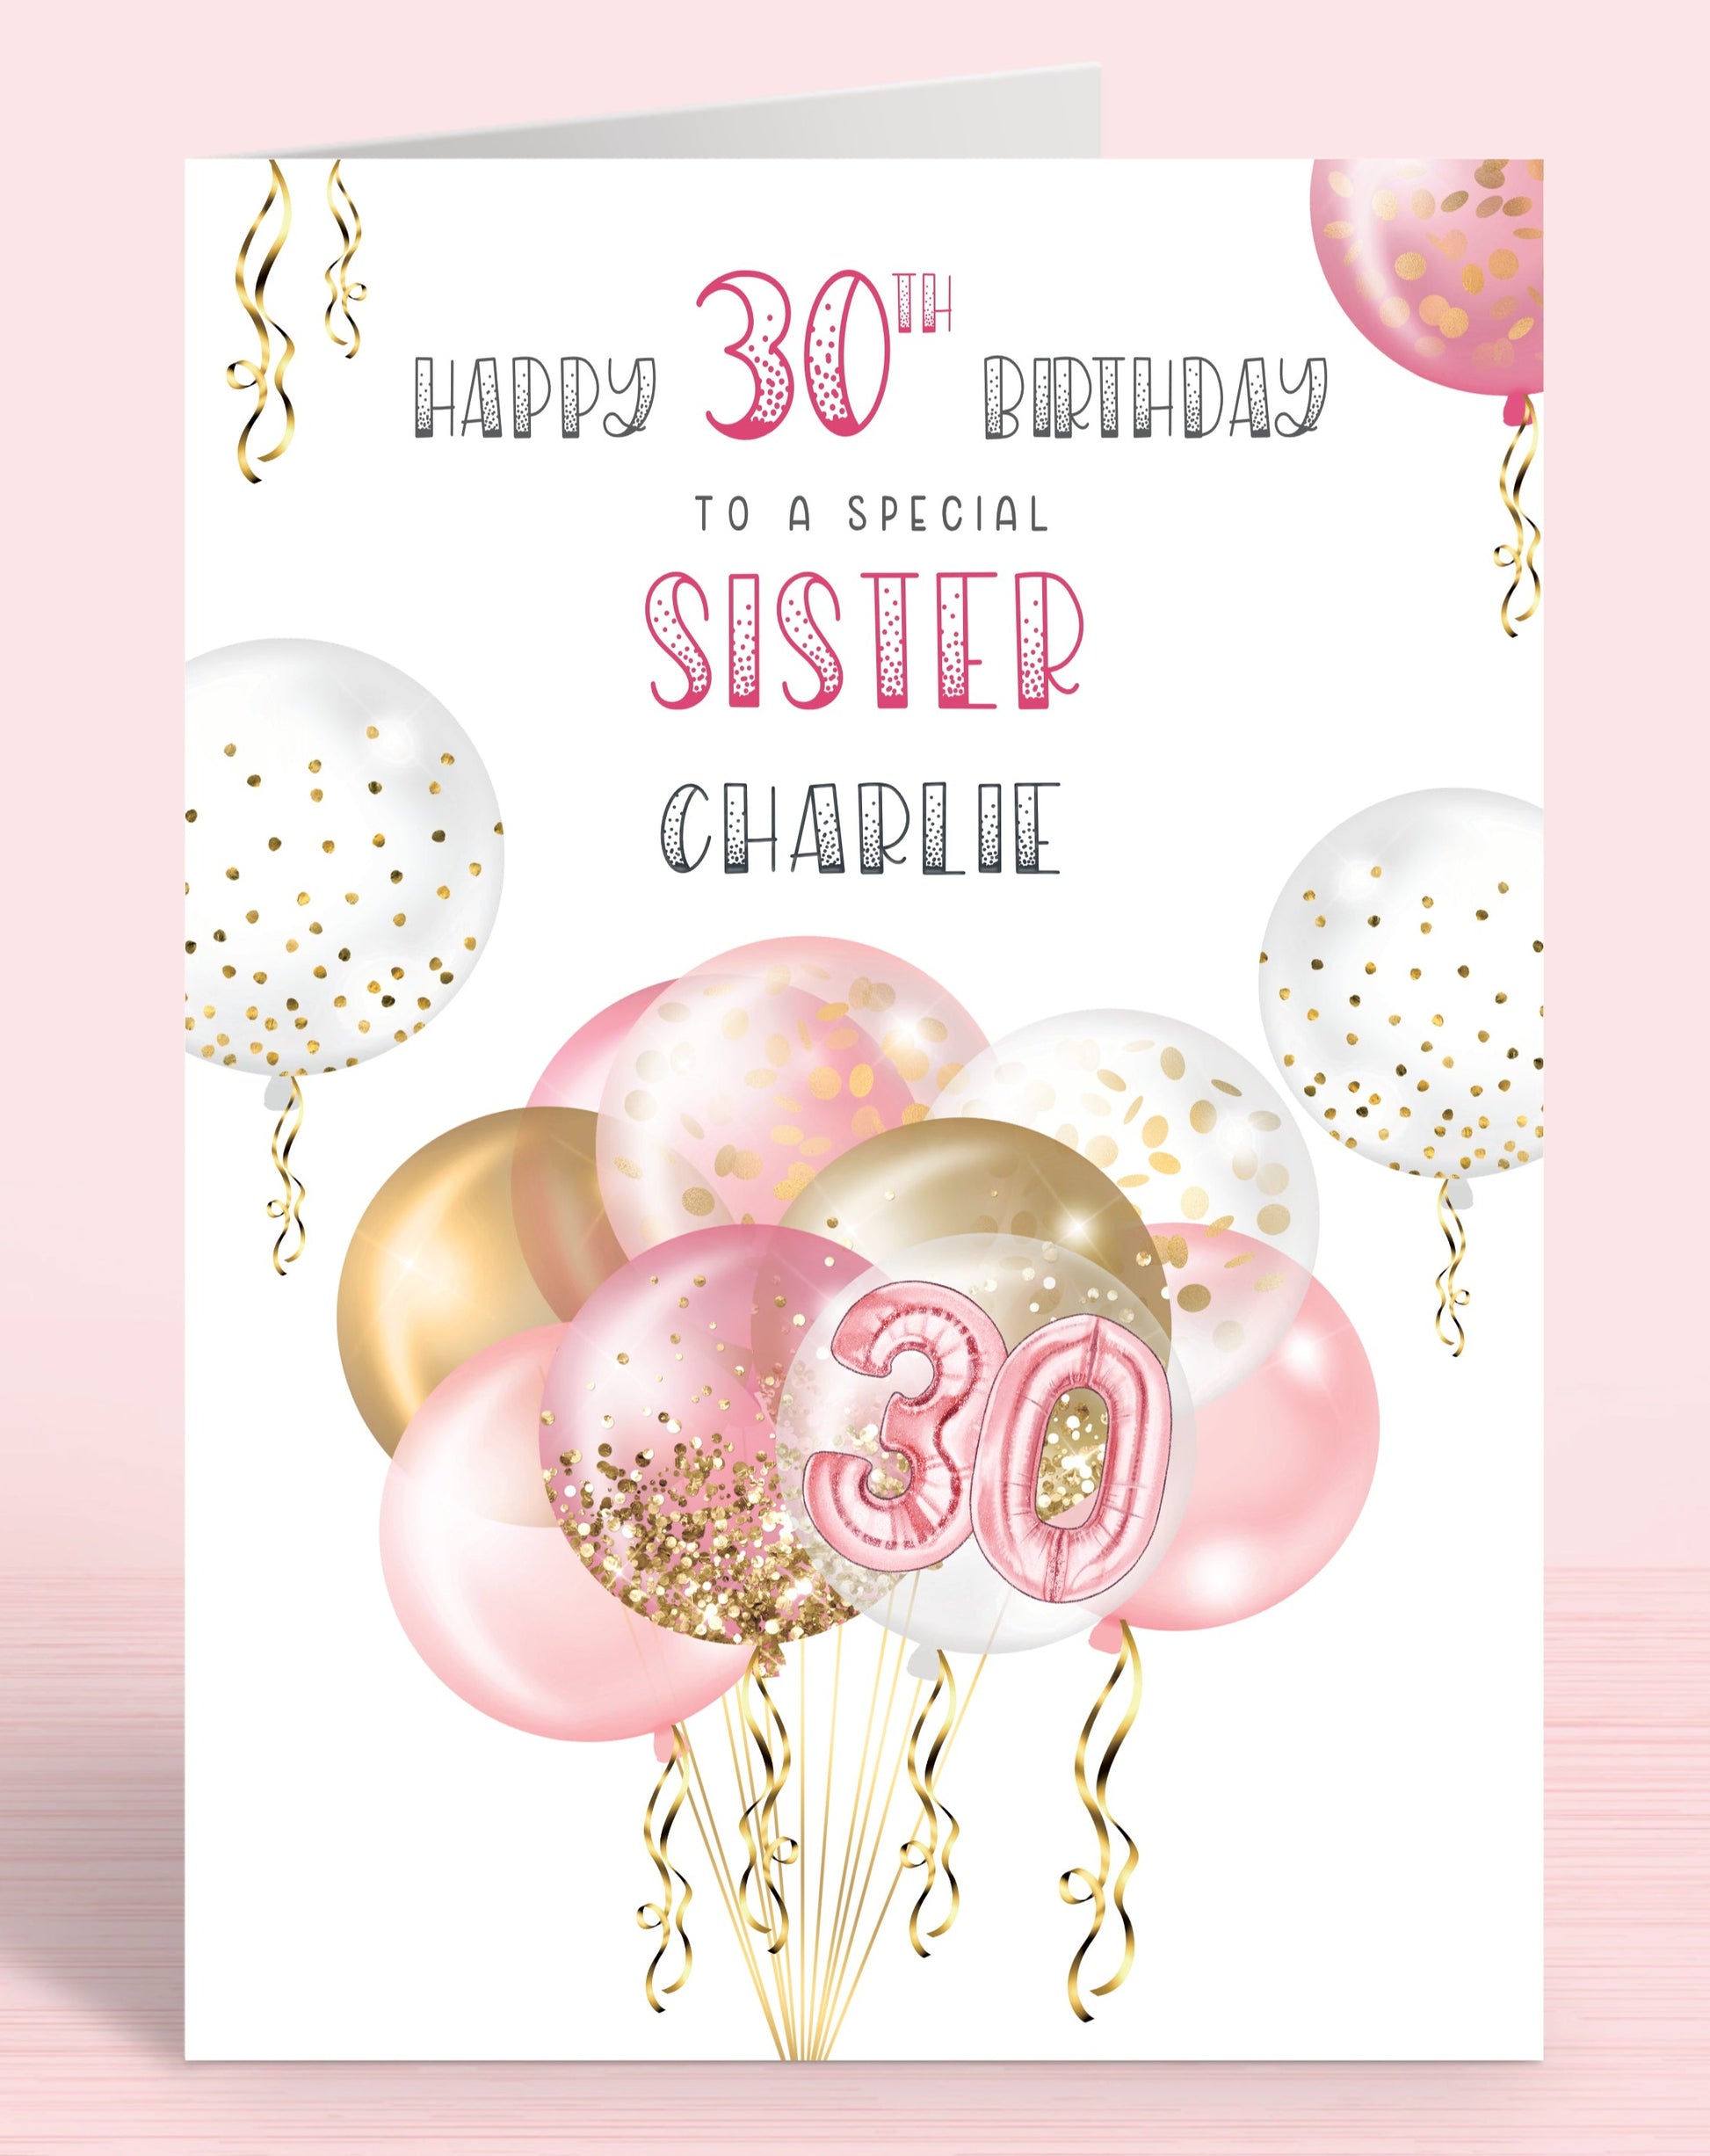 Pink Balloons Birthday Card, Sister Birthday Card, Personalised Birthday Card for Women, 30th Birthday Card for Her, Any Age, Any Age, Any Relation | Oliver Rose Designs